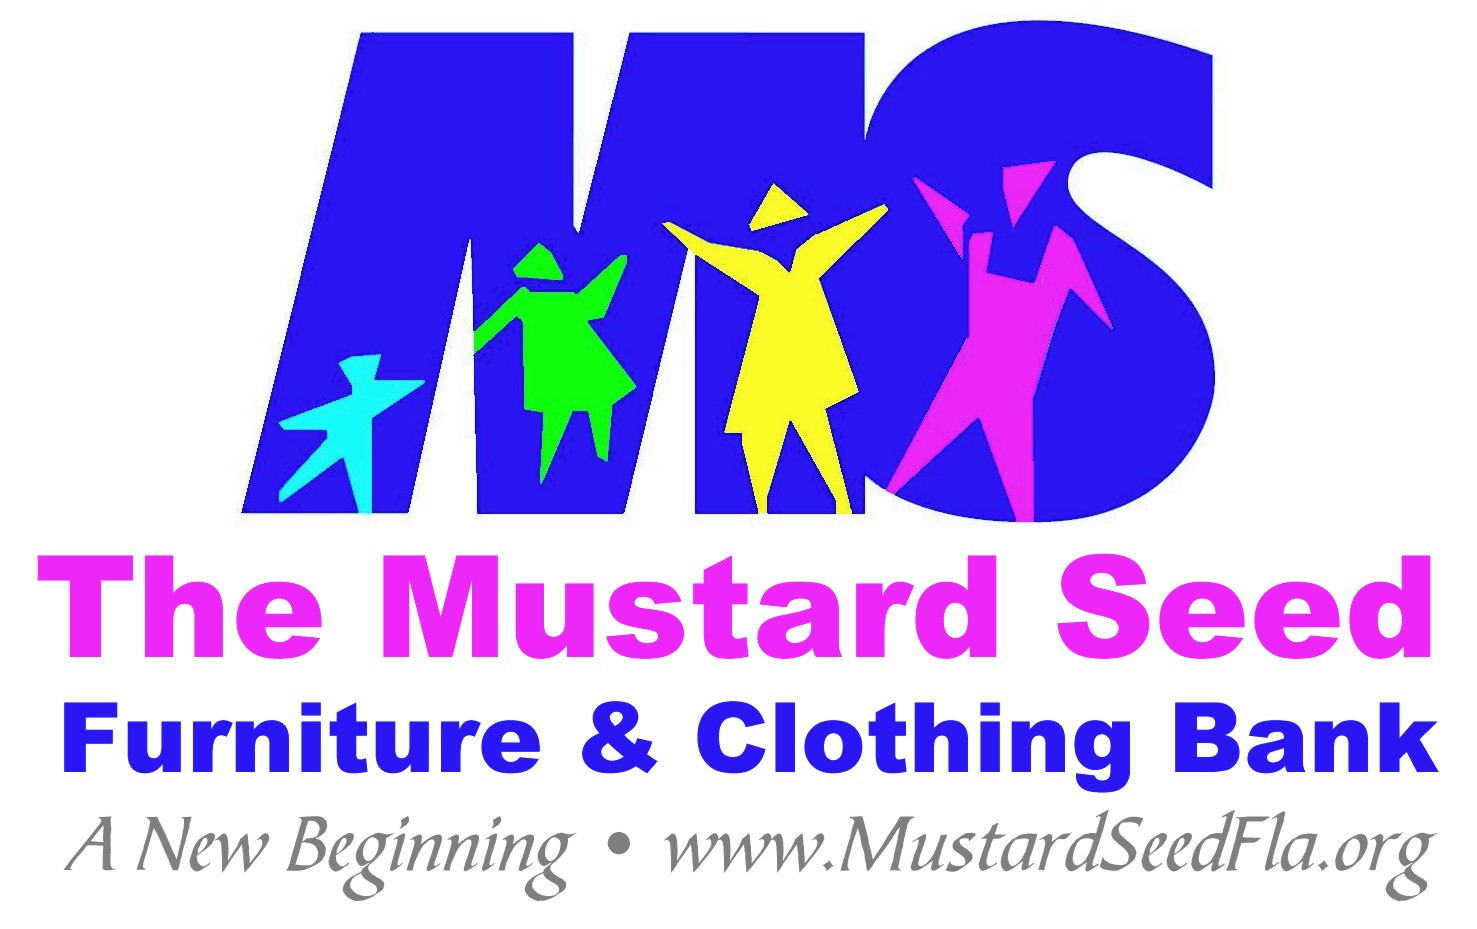 Volunteer with The Mustard Seed of Central Florida